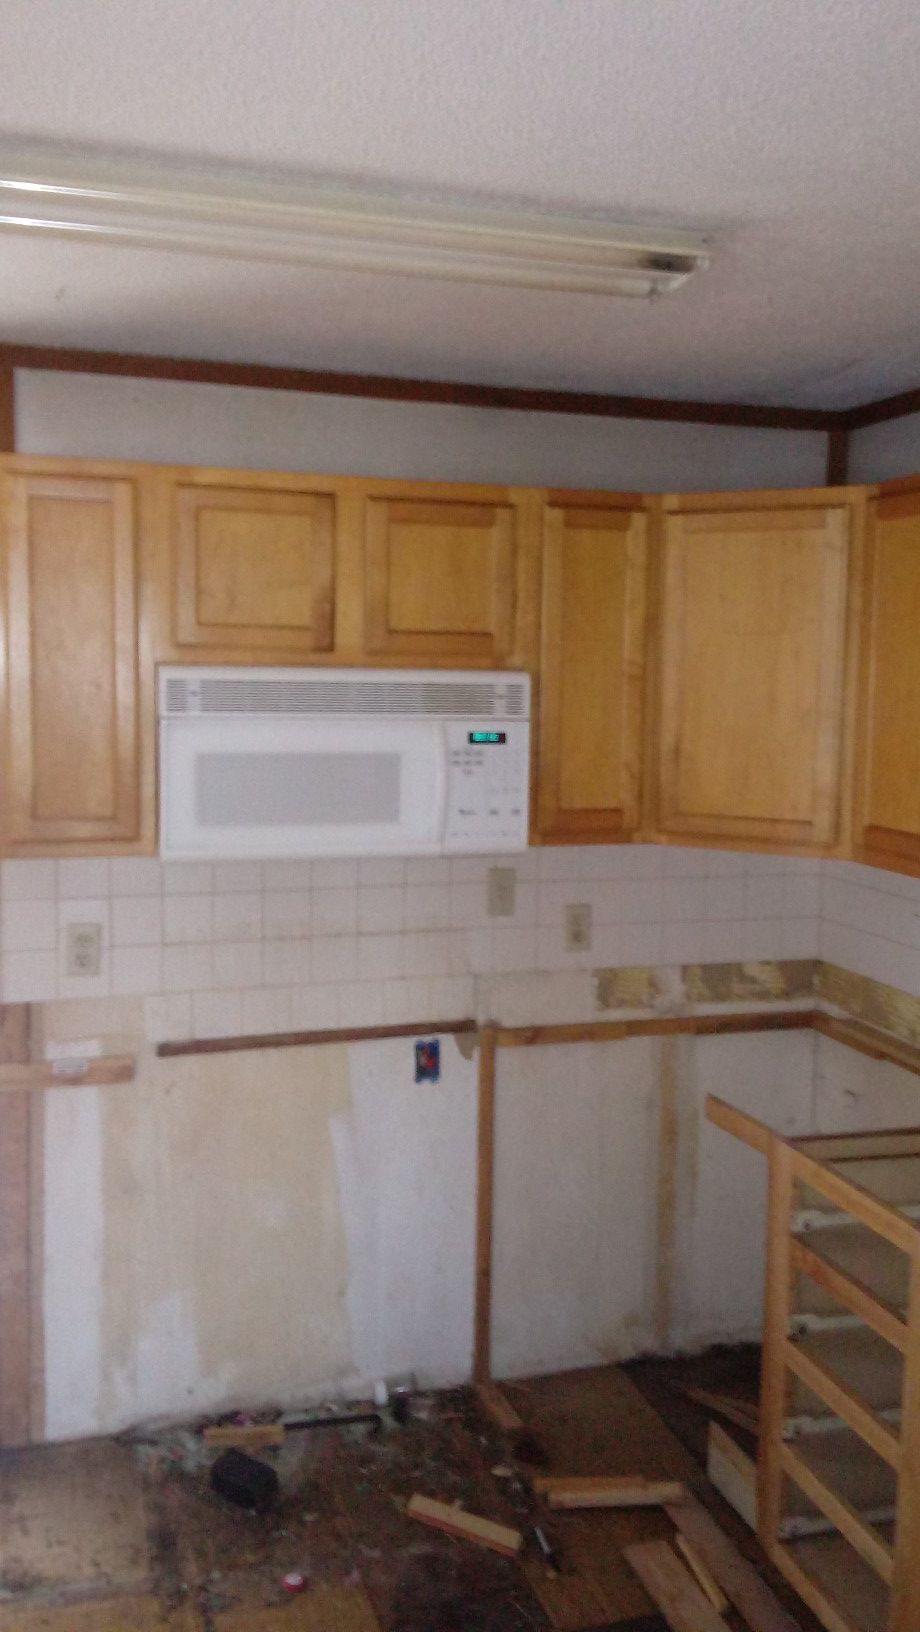 Upper kitchen cabinets and microwave